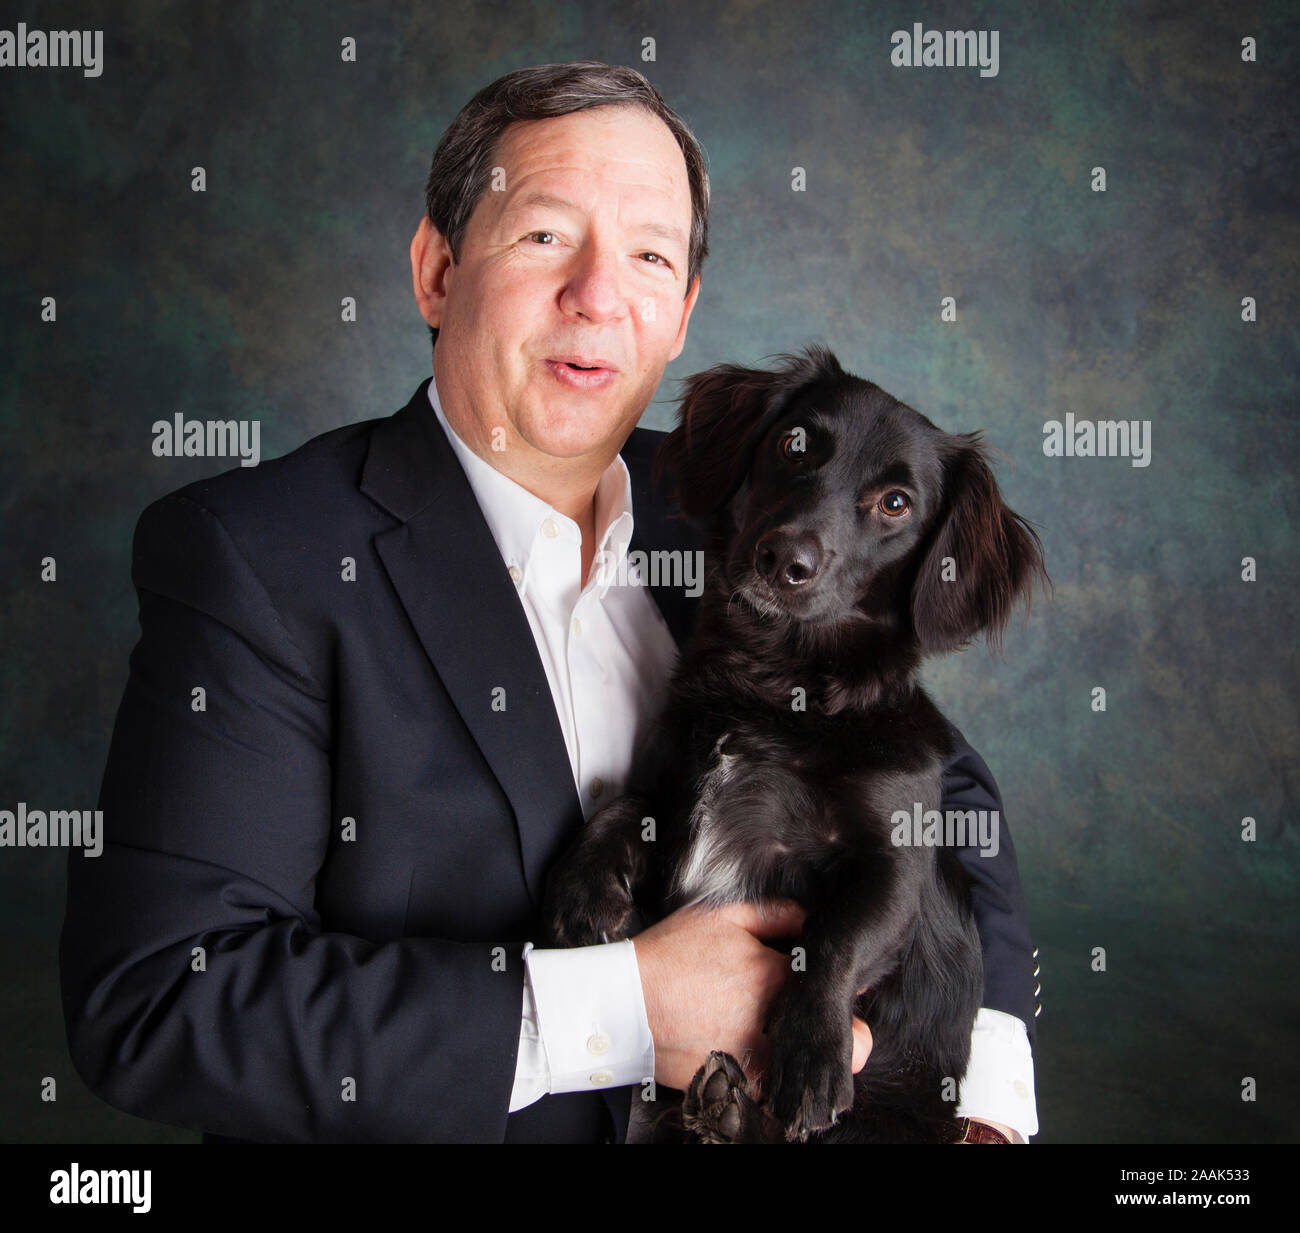 Studio portrait of man with mixed breed dog Stock Photo